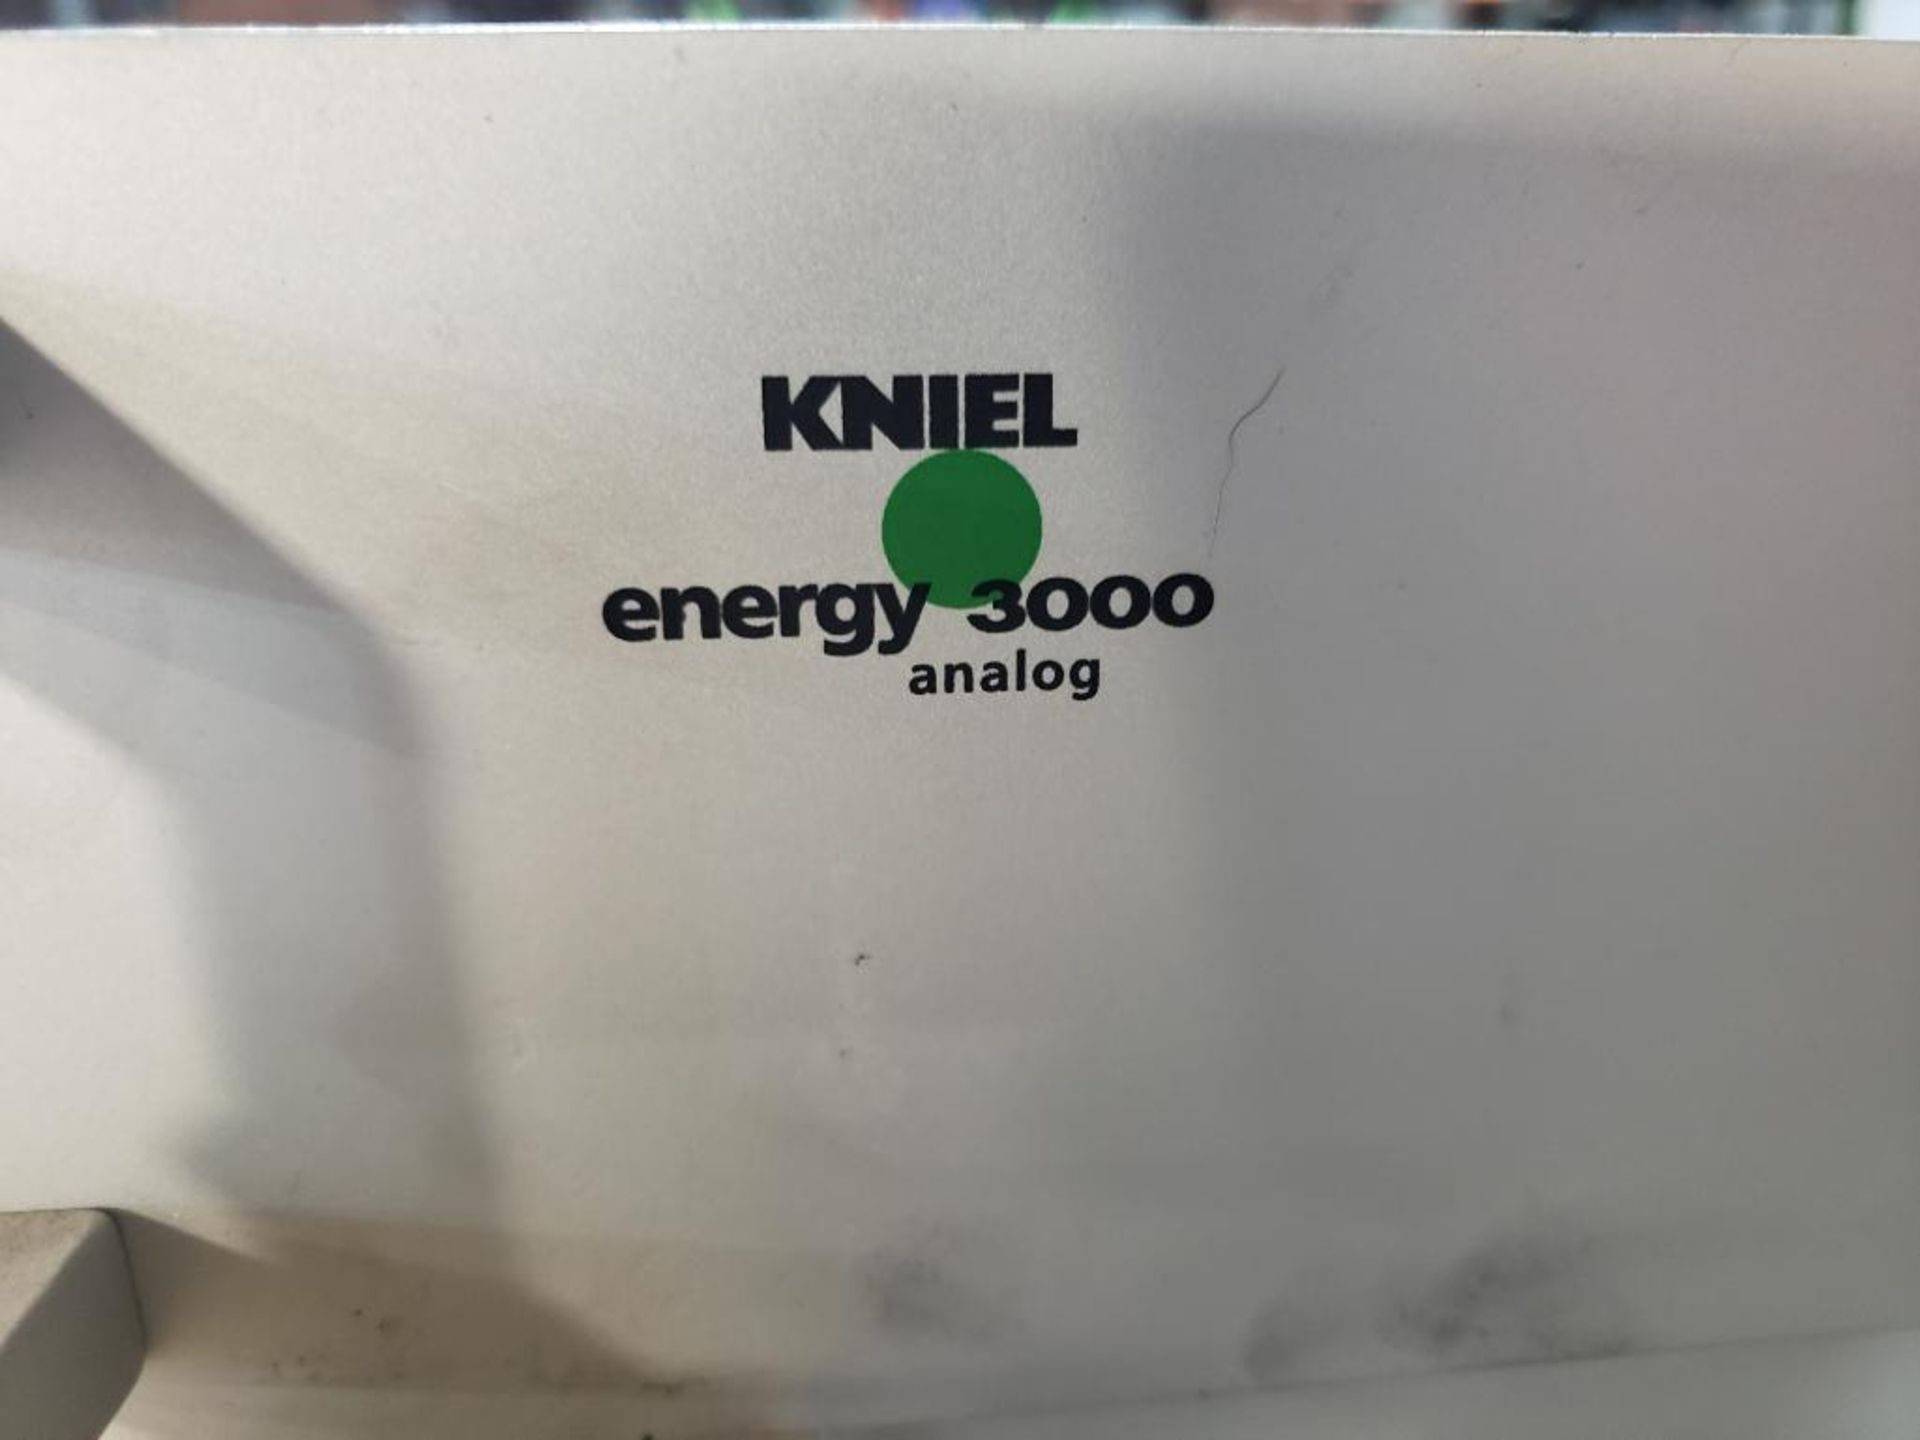 Qty 4 - Kniel energy 3000 analog power supply. VE3P 140.25/OP1 - Image 2 of 7